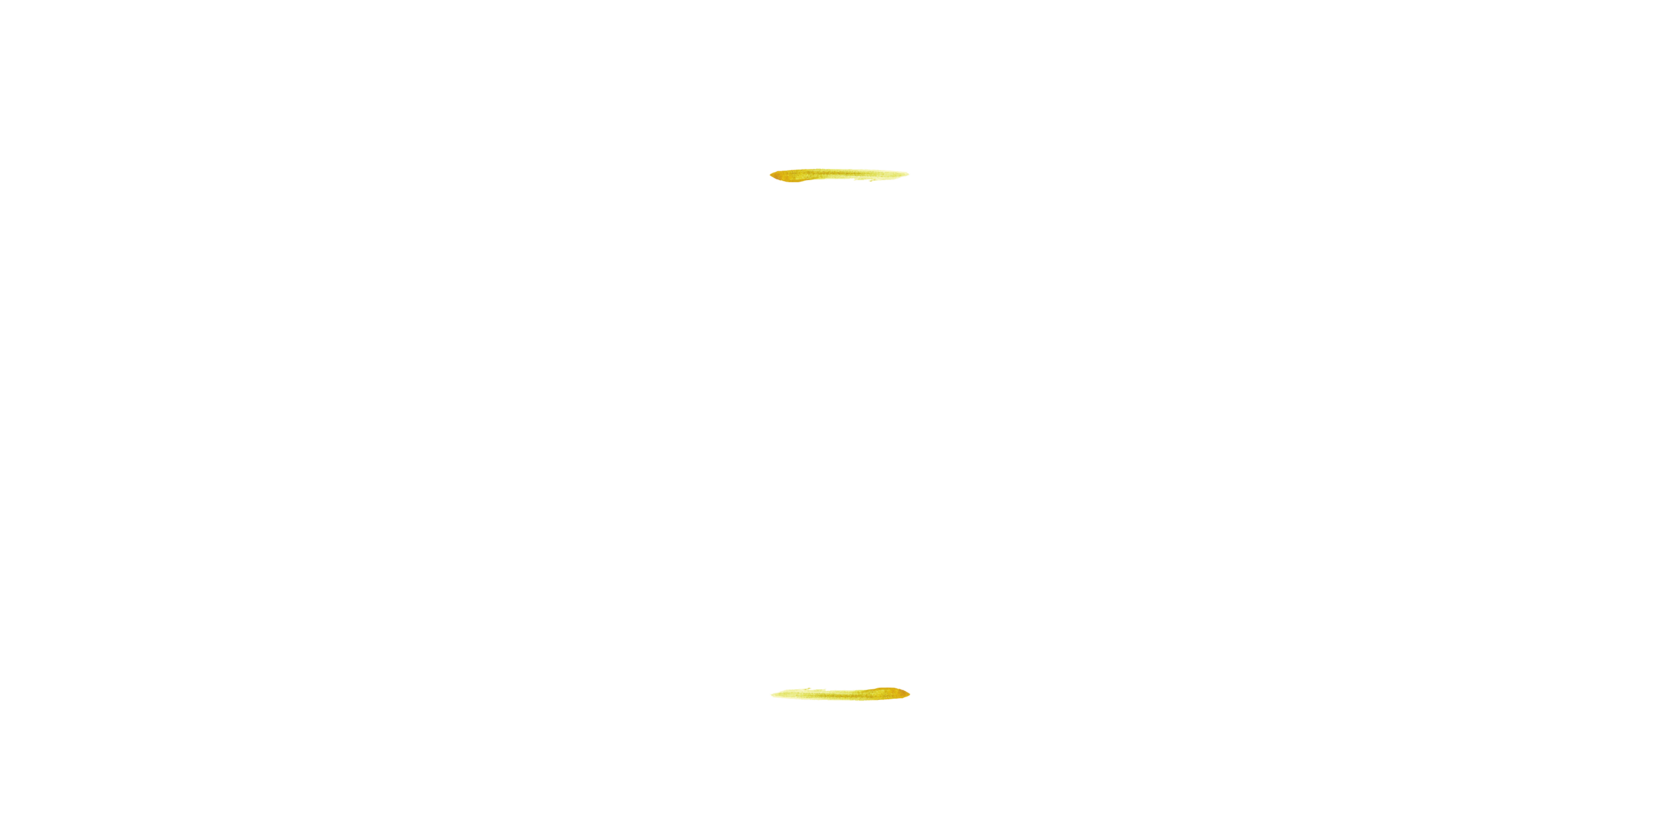 Say-yes-to-life's-invitations